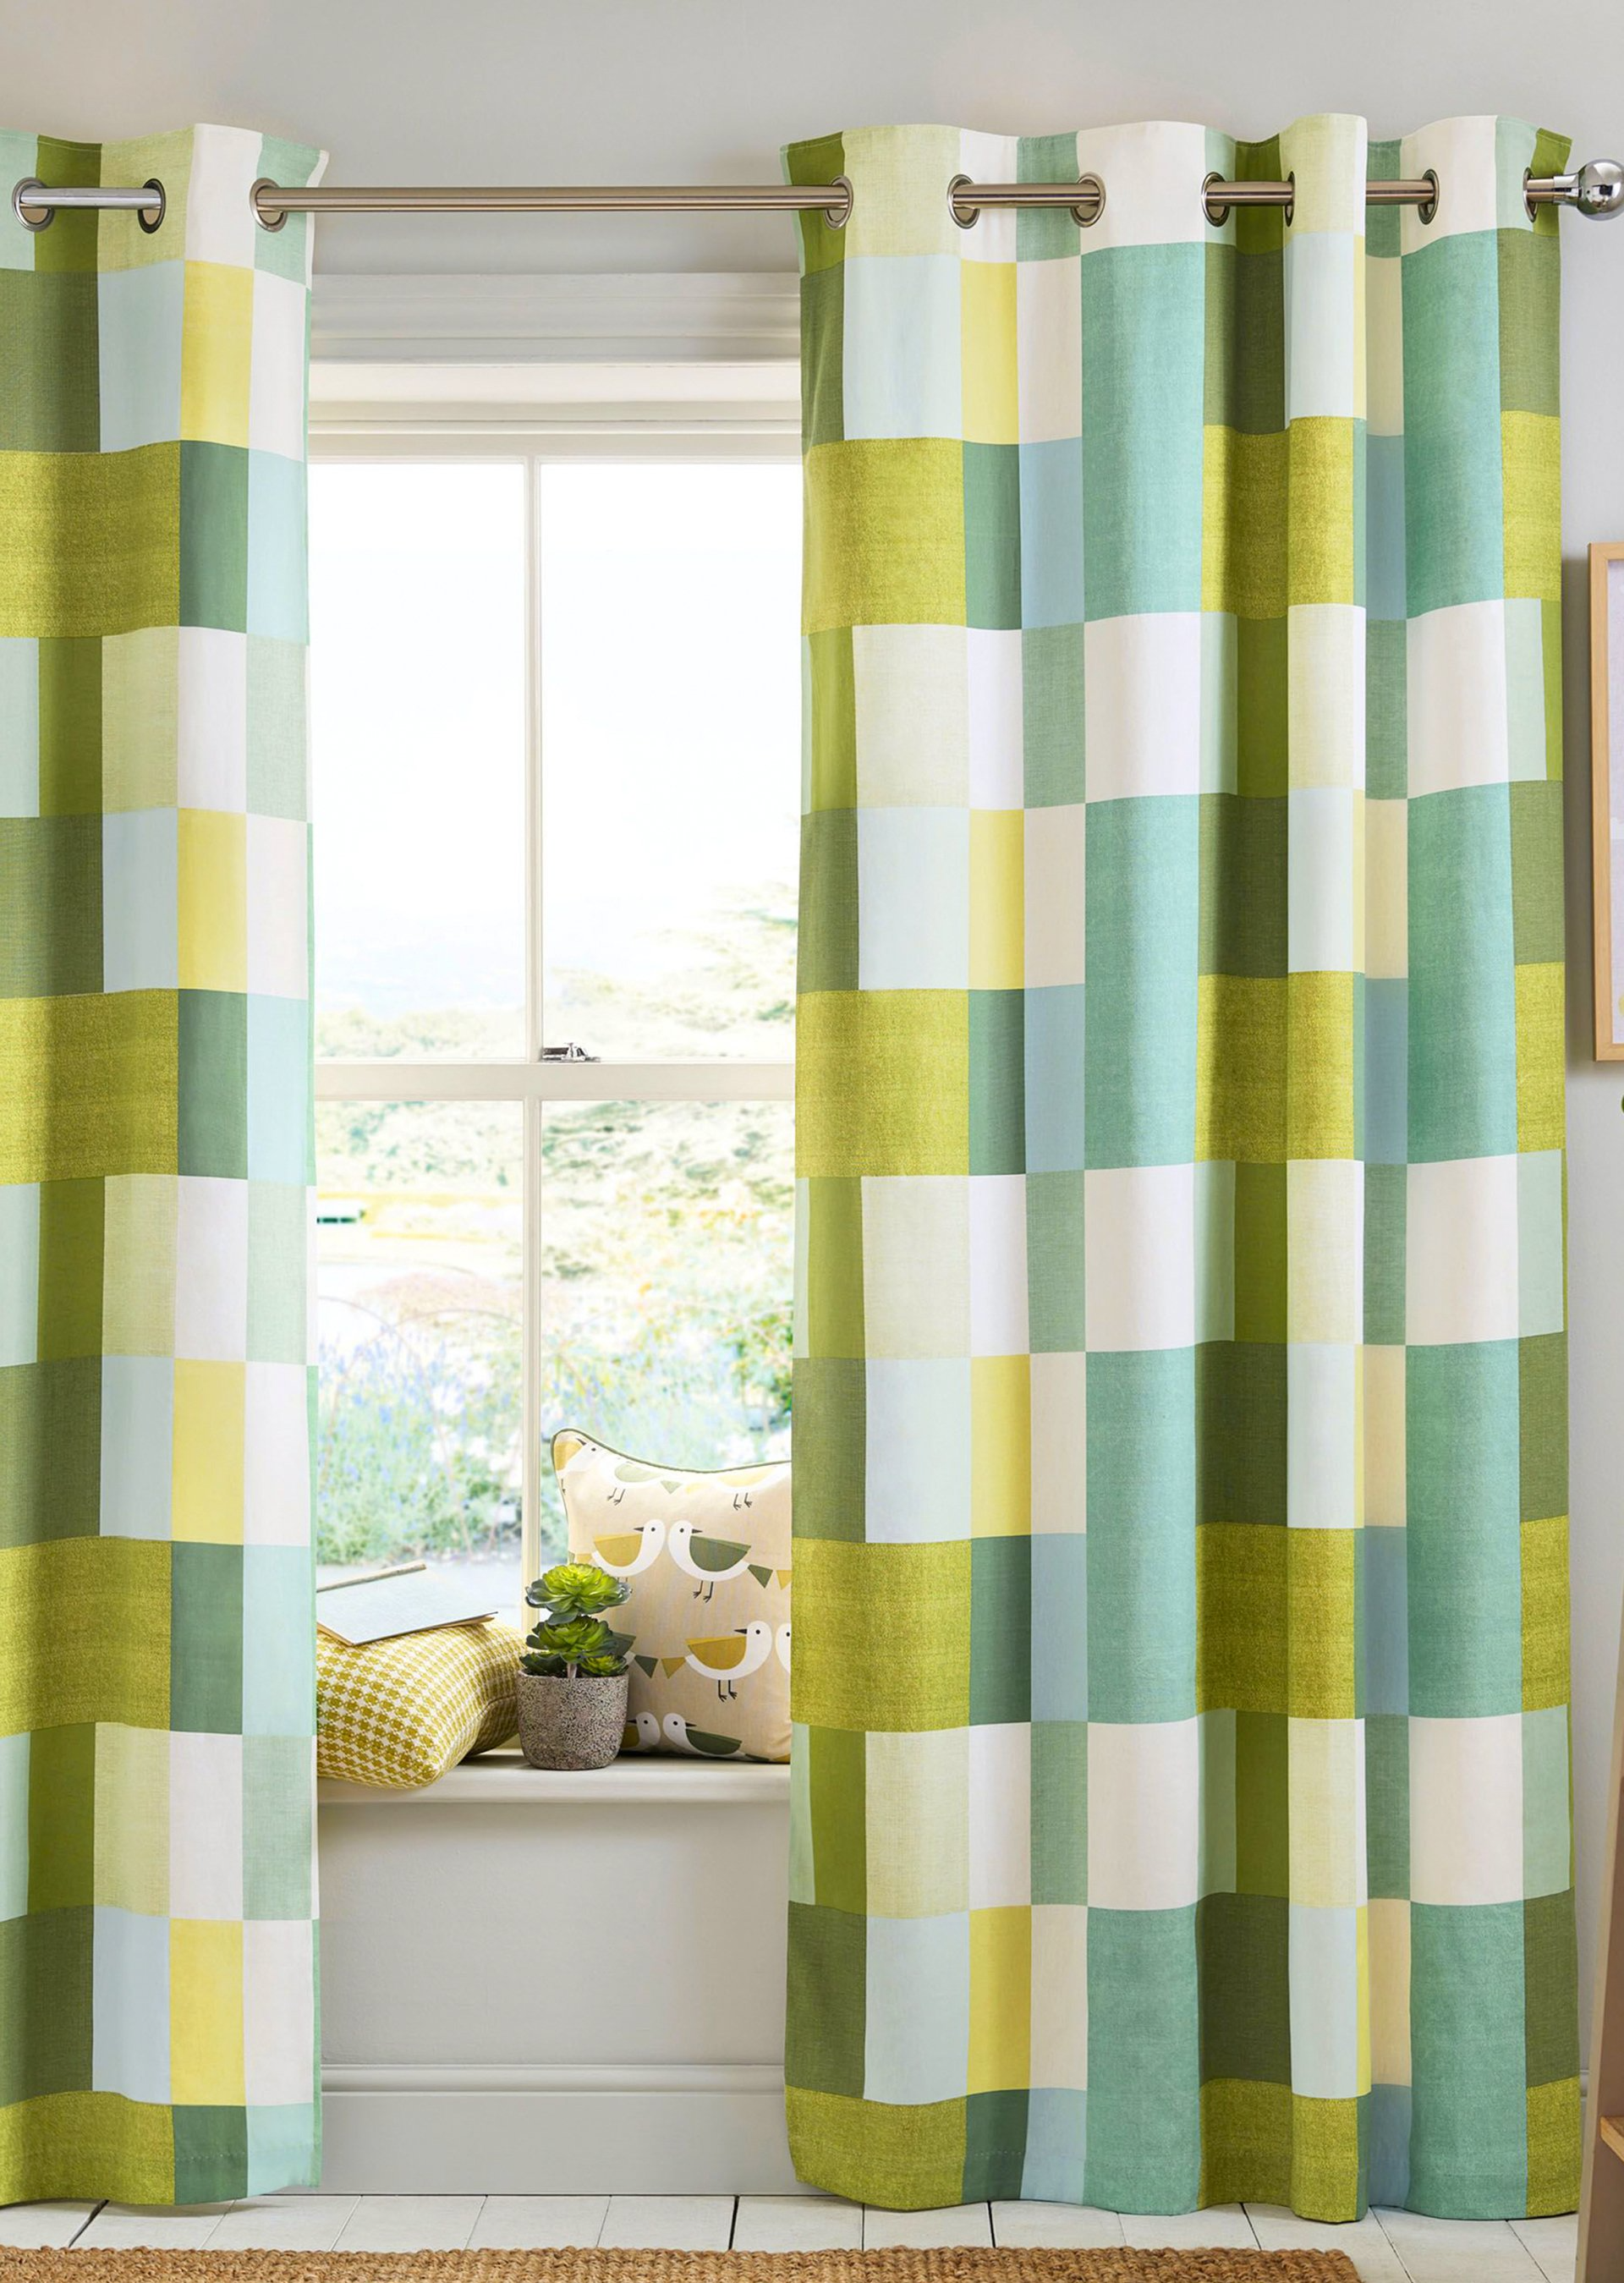 A pair of green and yellow curtains are hanging on a window.